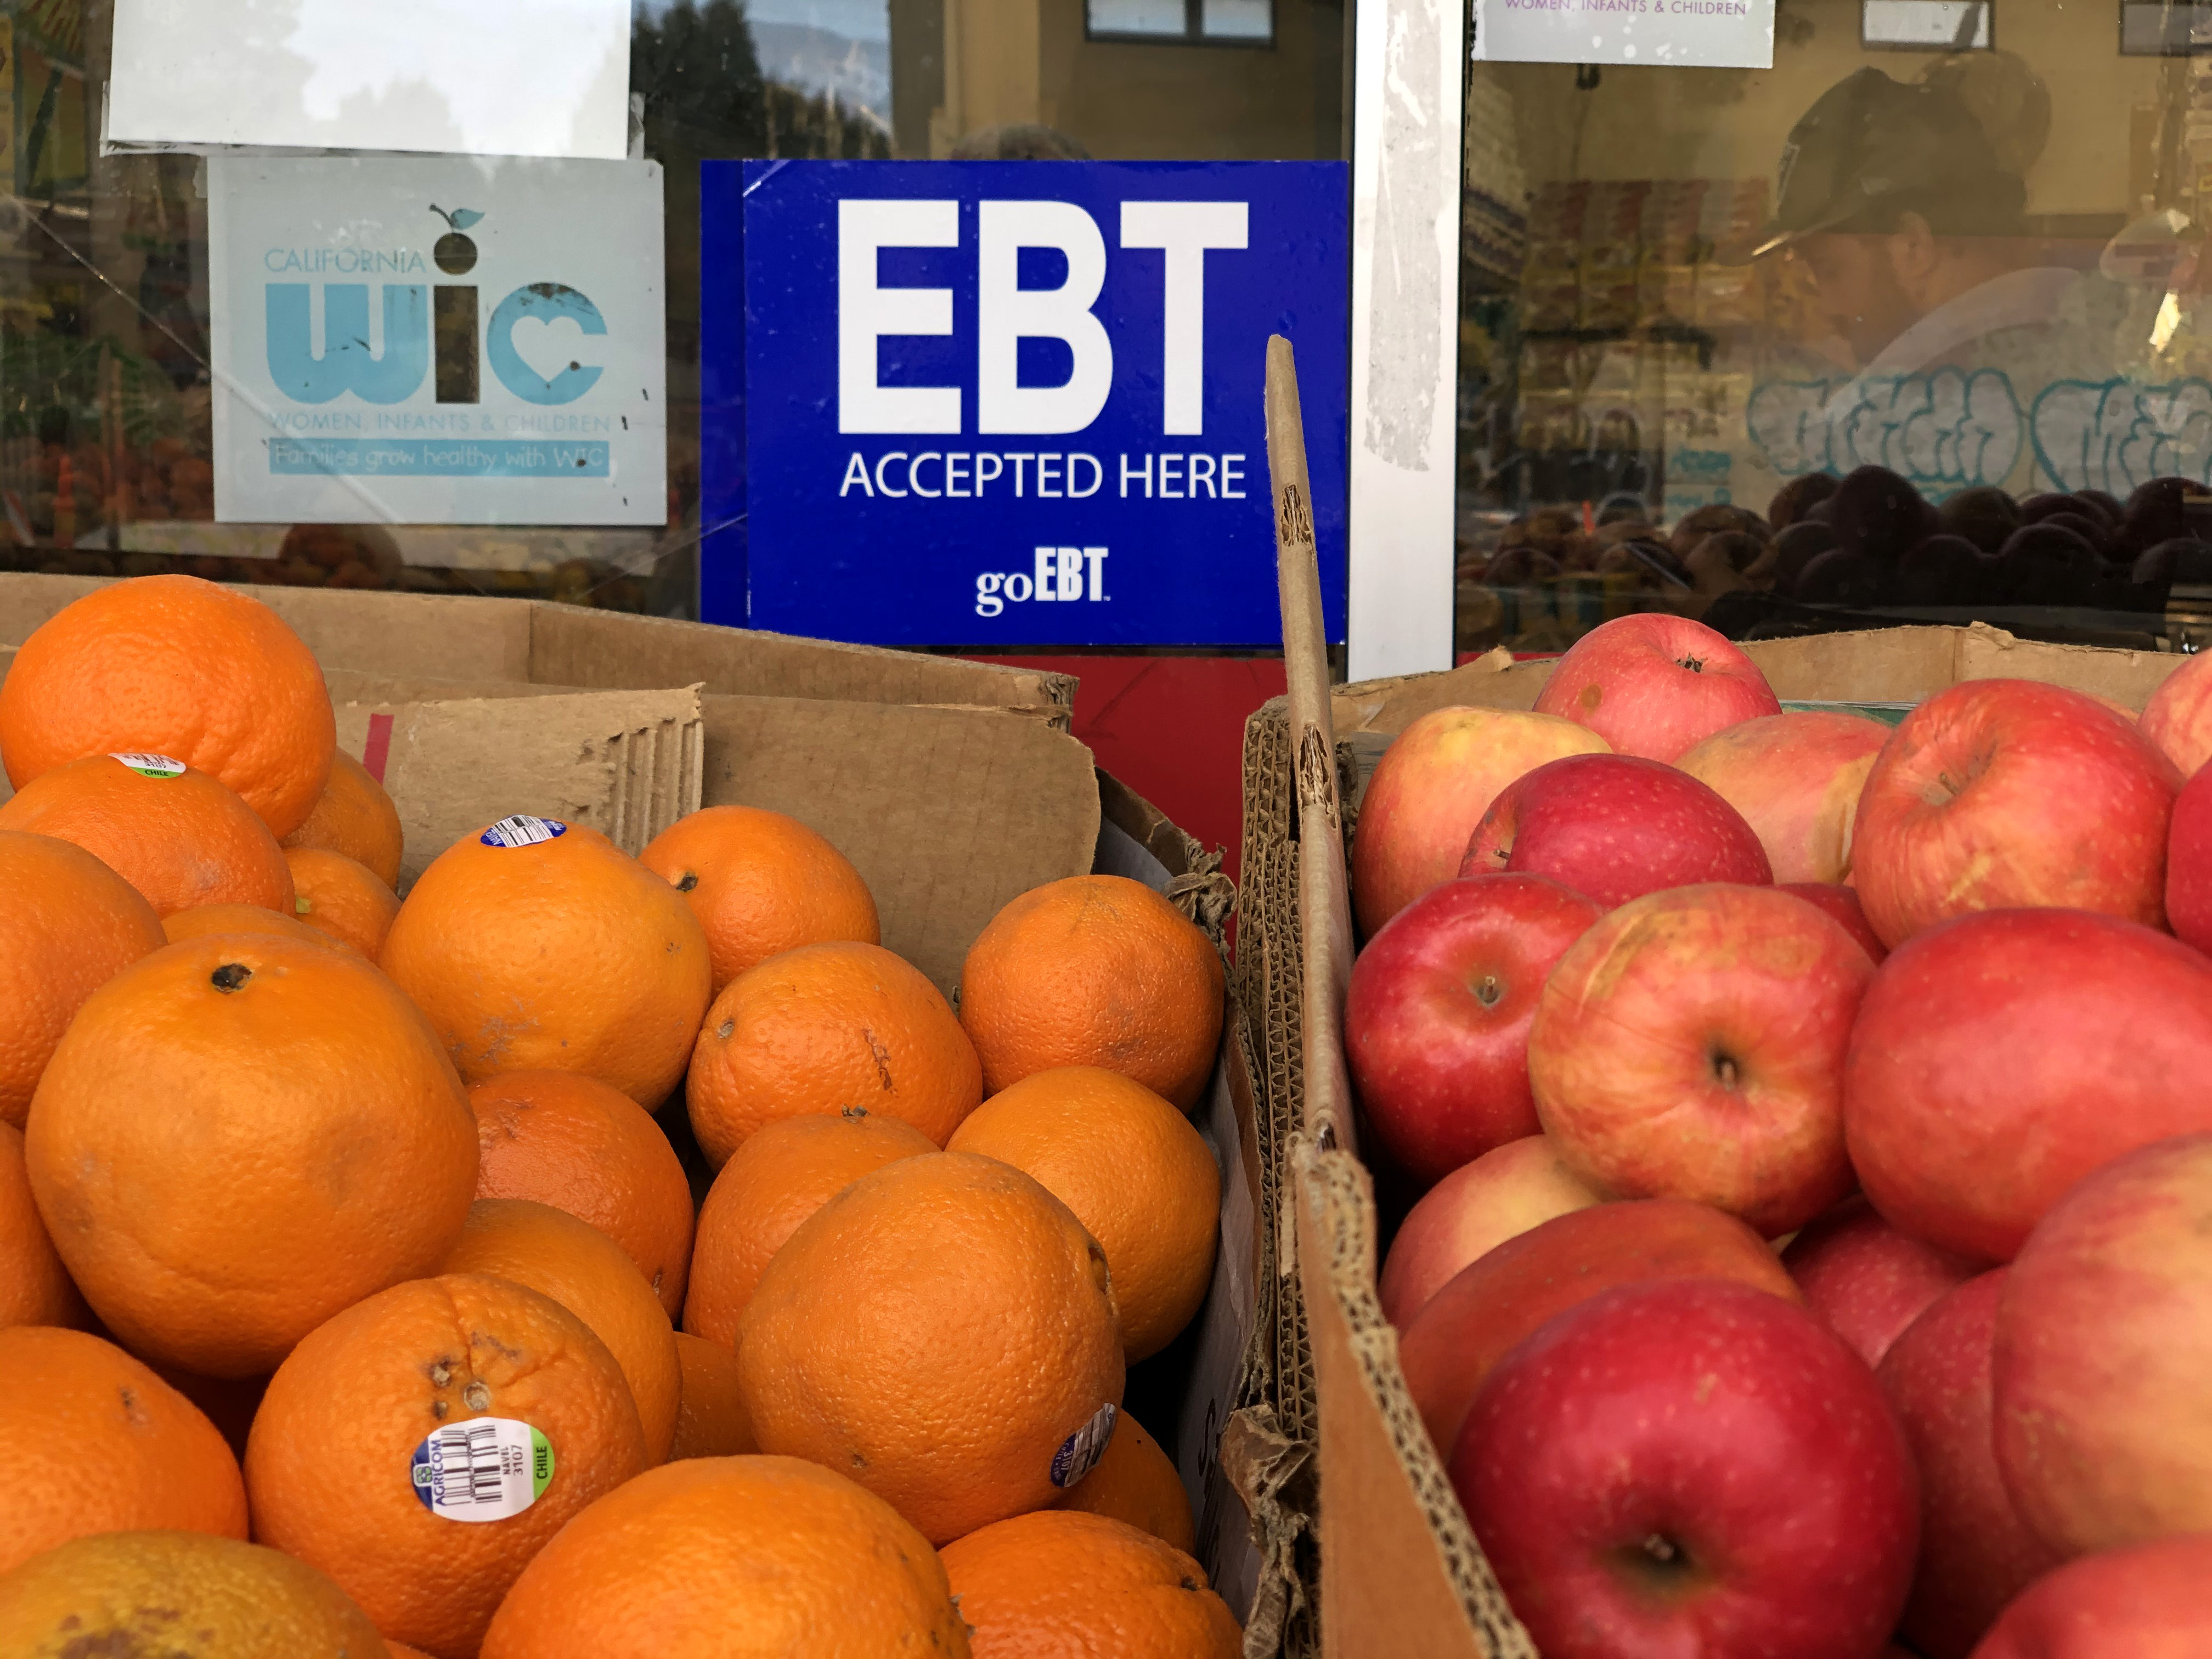 A sign noting the acceptance of electronic benefit transfer (EBT) cards that are used to issue benefits